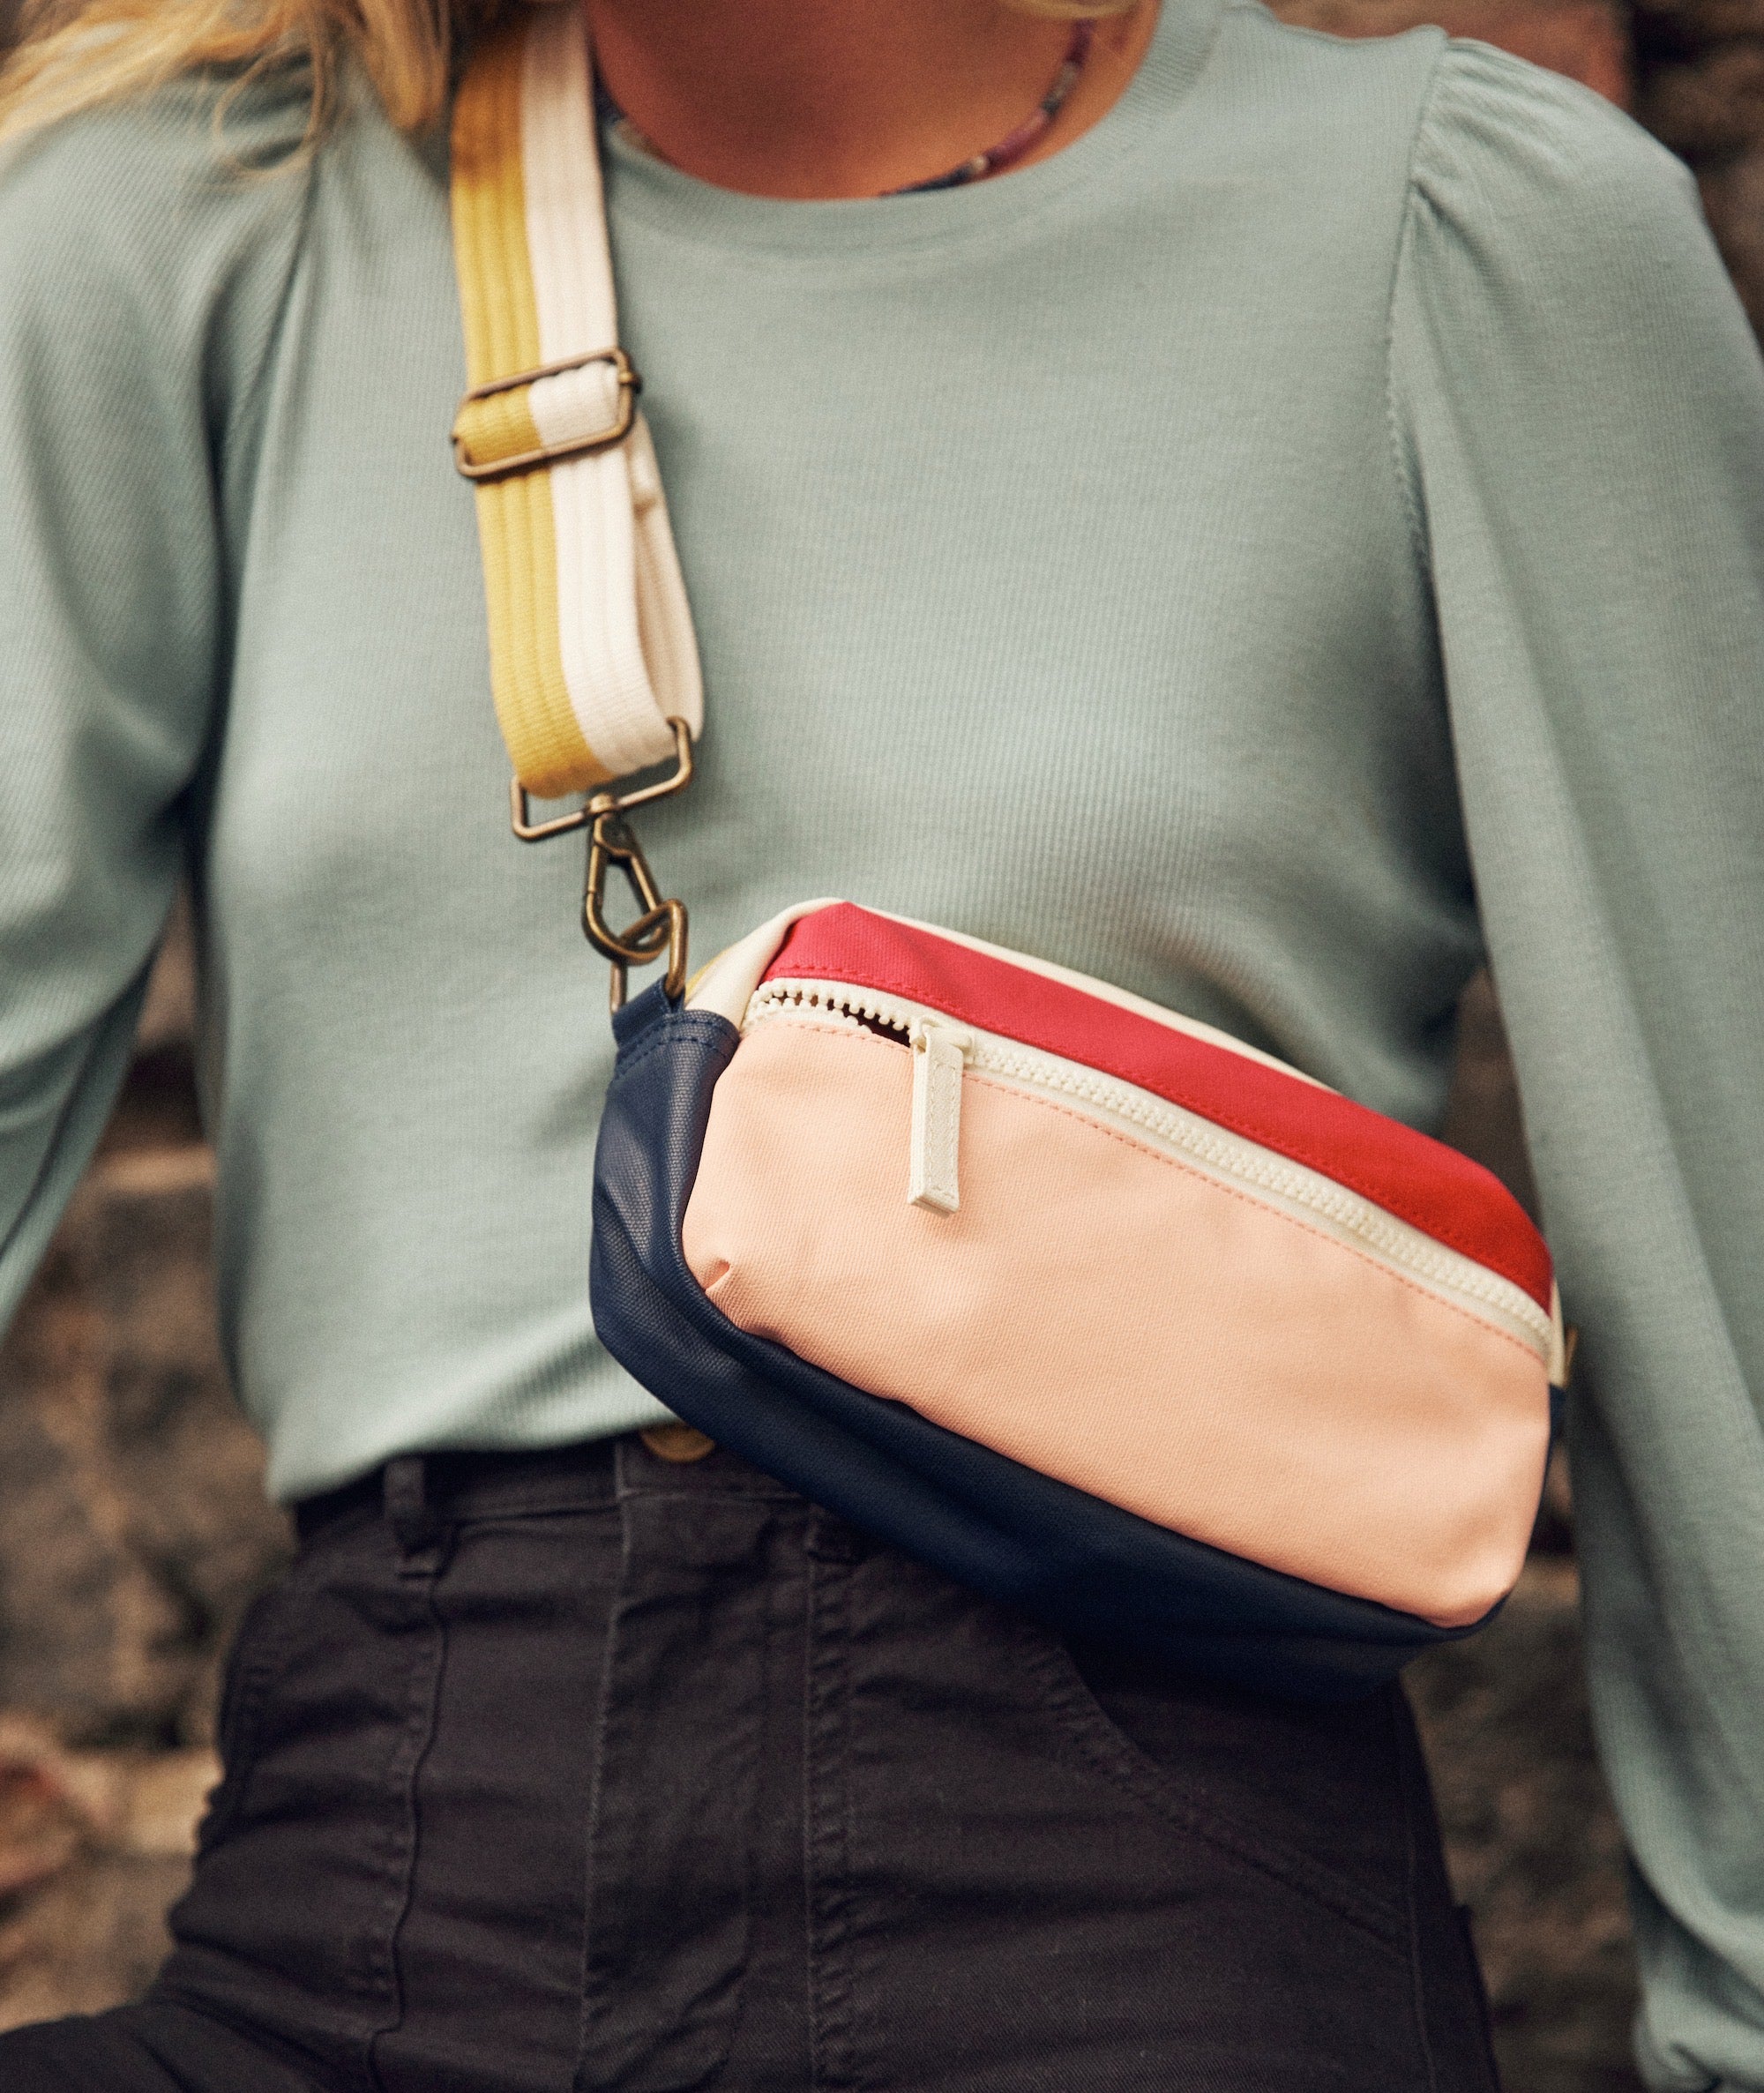 Fanny Pack Style & How To Rock A Fanny Pack